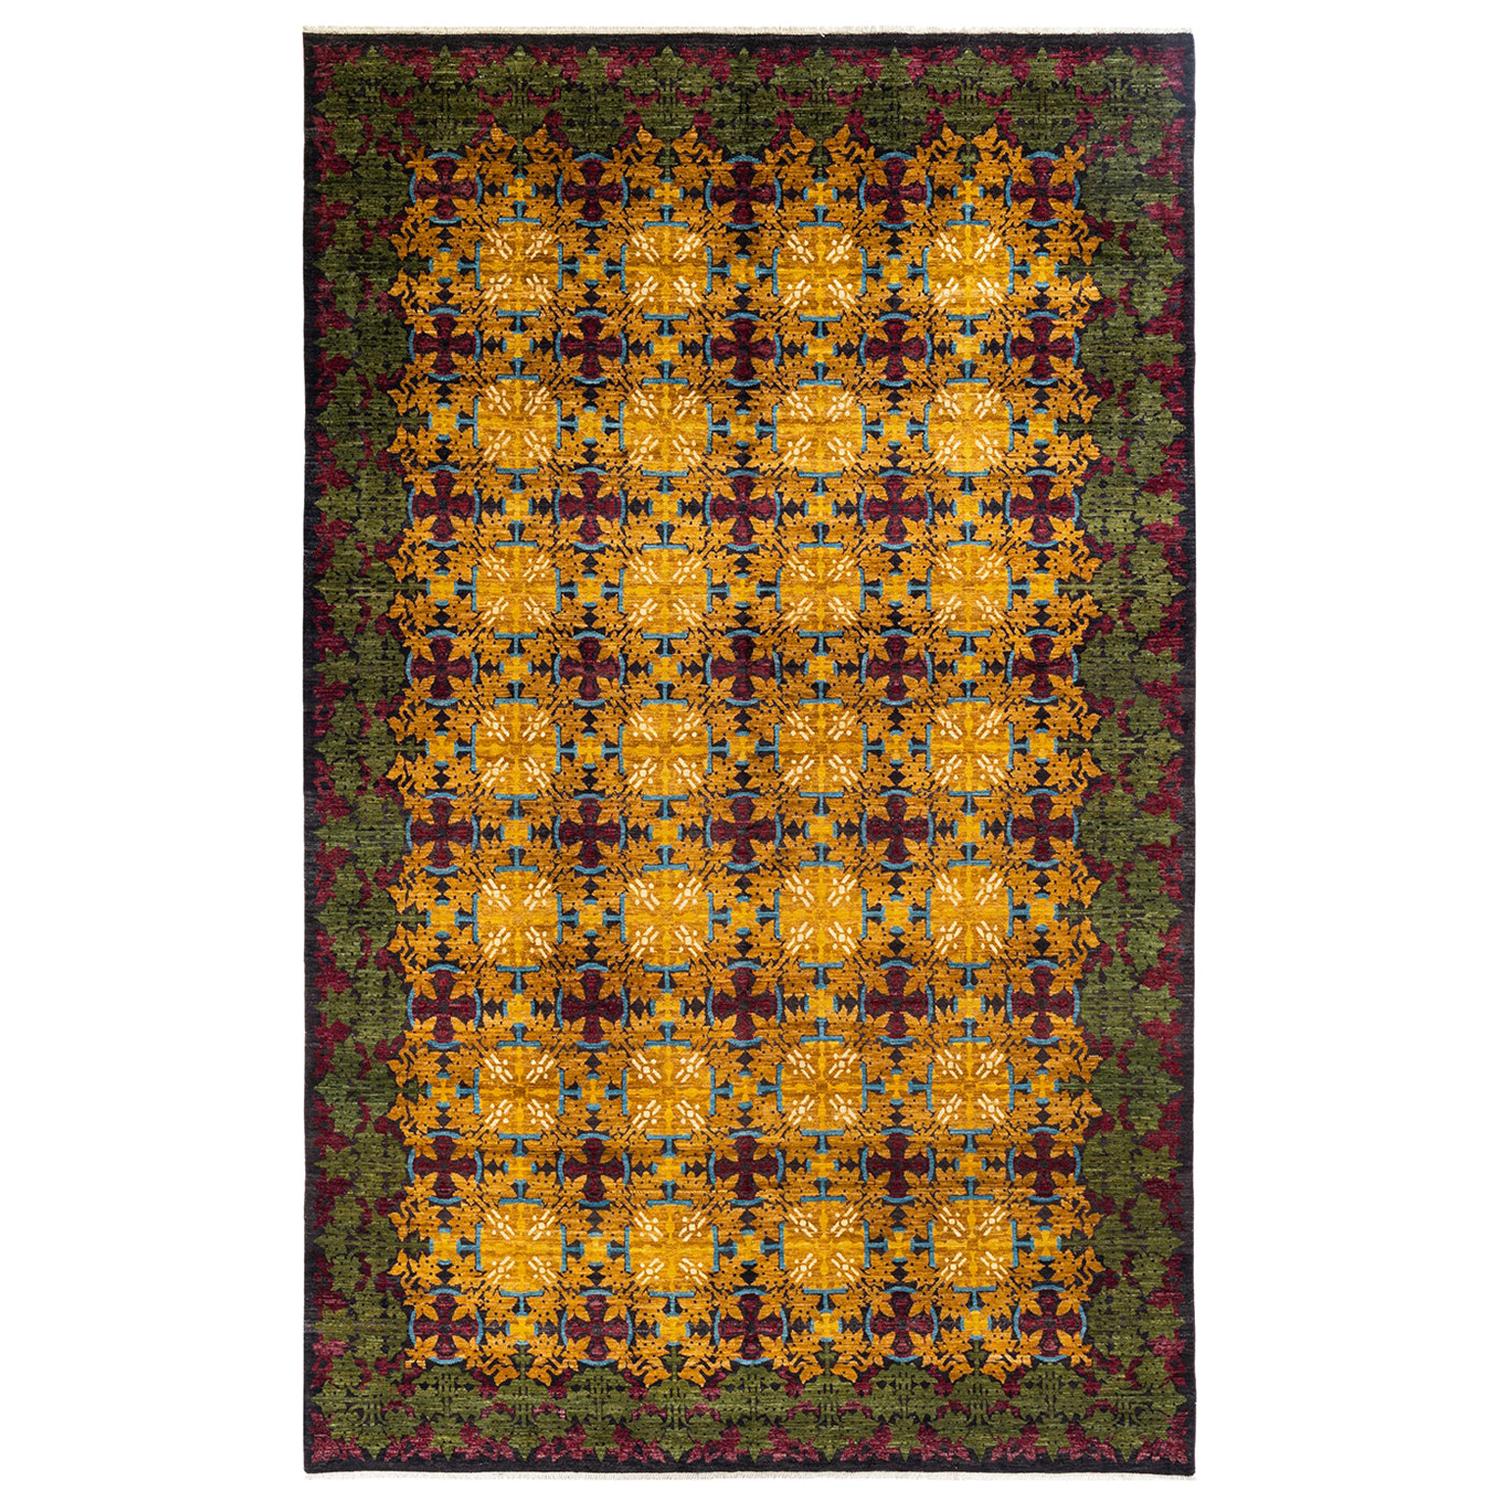 Suzani, One-of-a-Kind Hand-Knotted Area Rug, Red